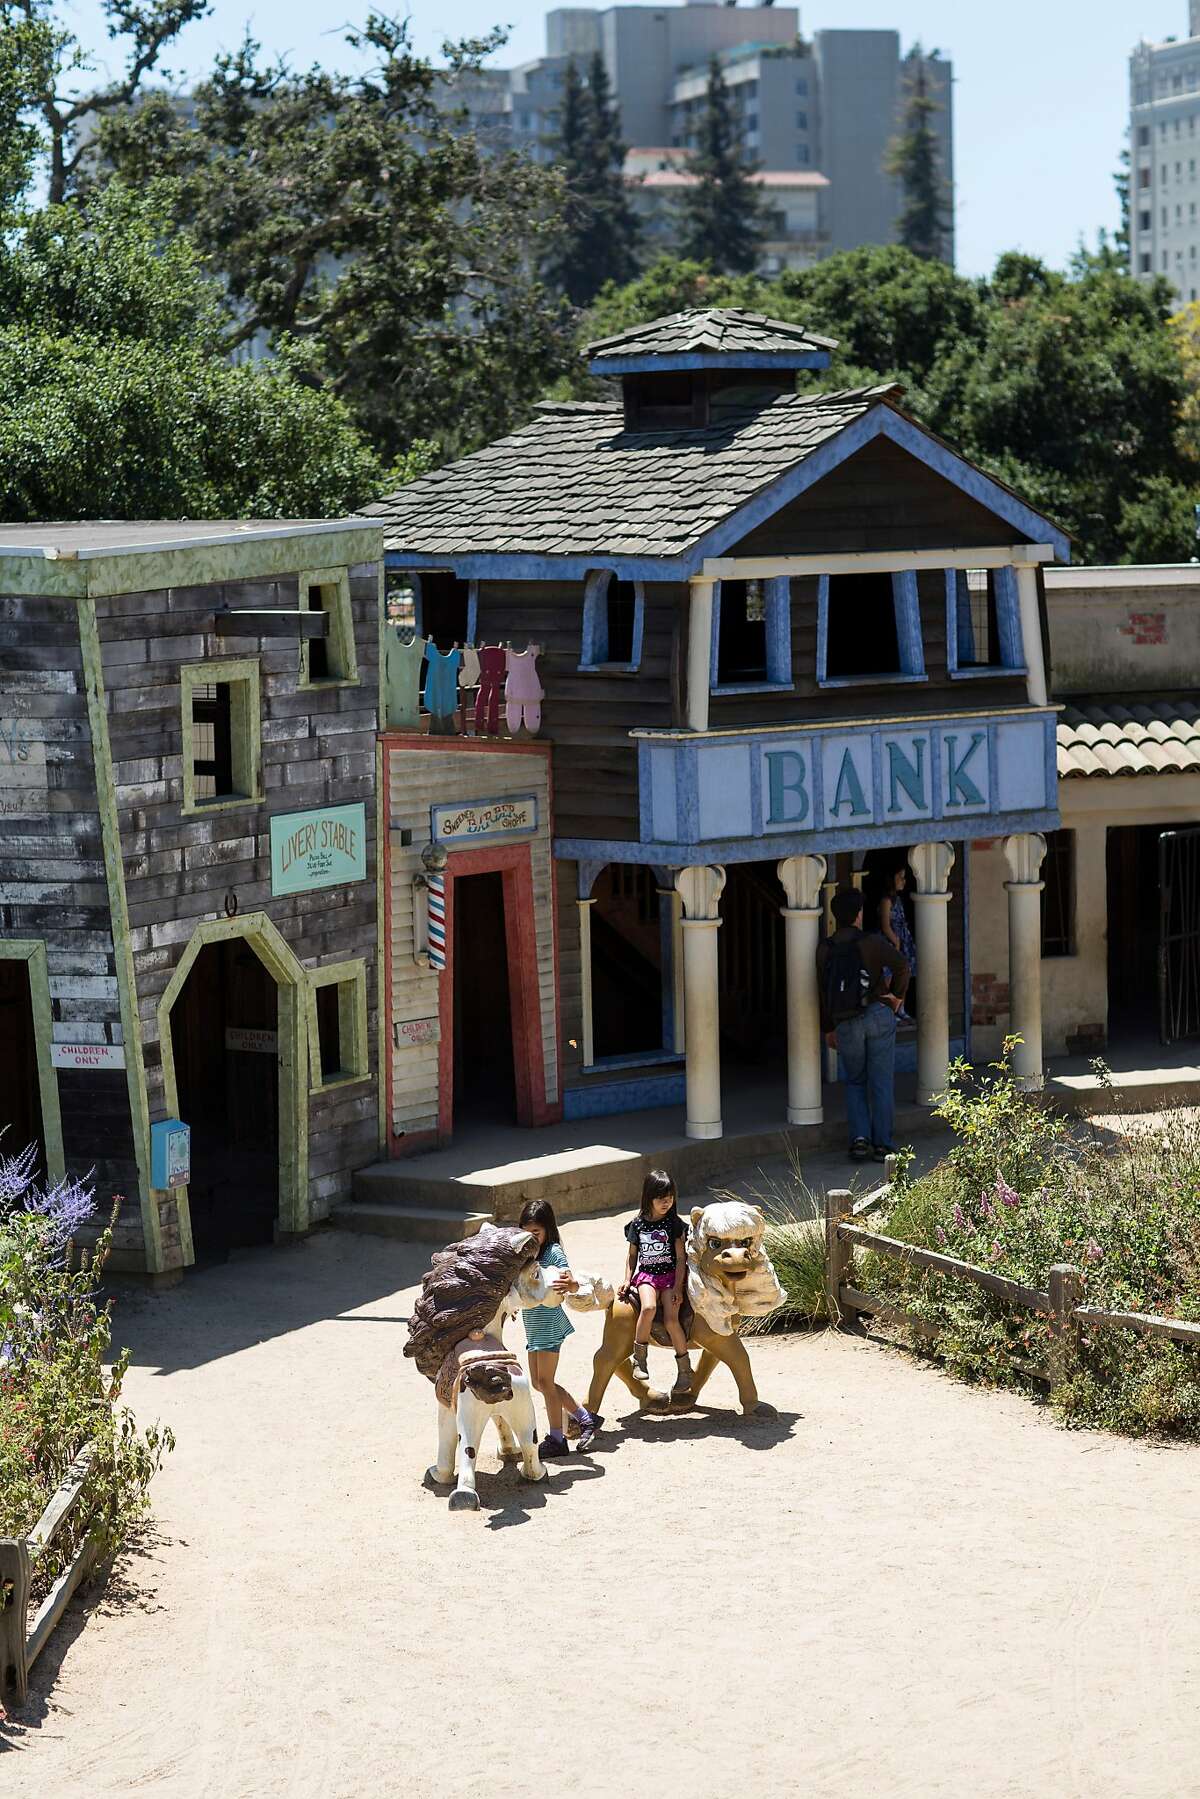 Children and families play in the Old West Junction attraction at Children's Fairyland in Oakland, Calif., on Sunday, June 4, 2017. The classic children's amusement park is located on the shores of Lake Merritt.